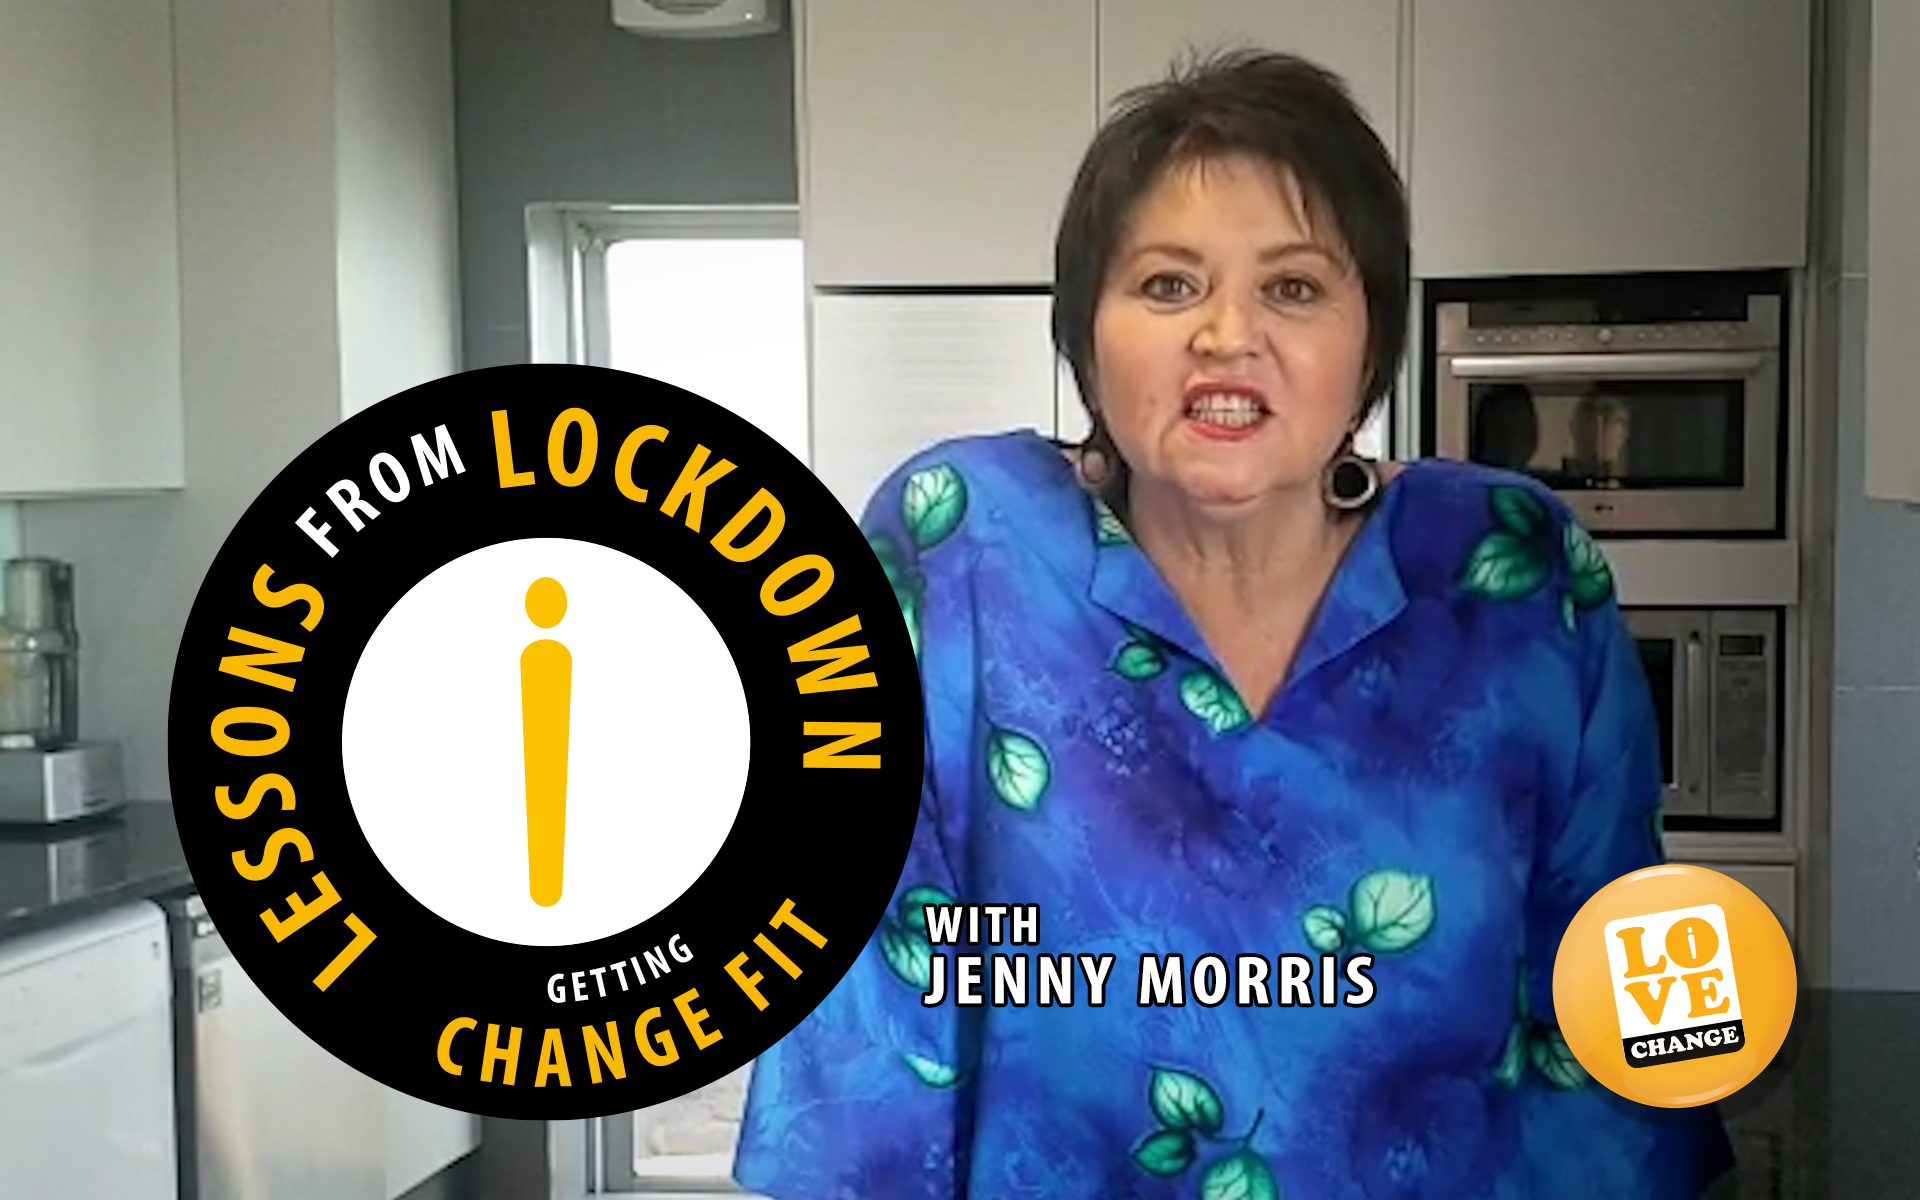 Lessons from lockdown with Jenny Morris